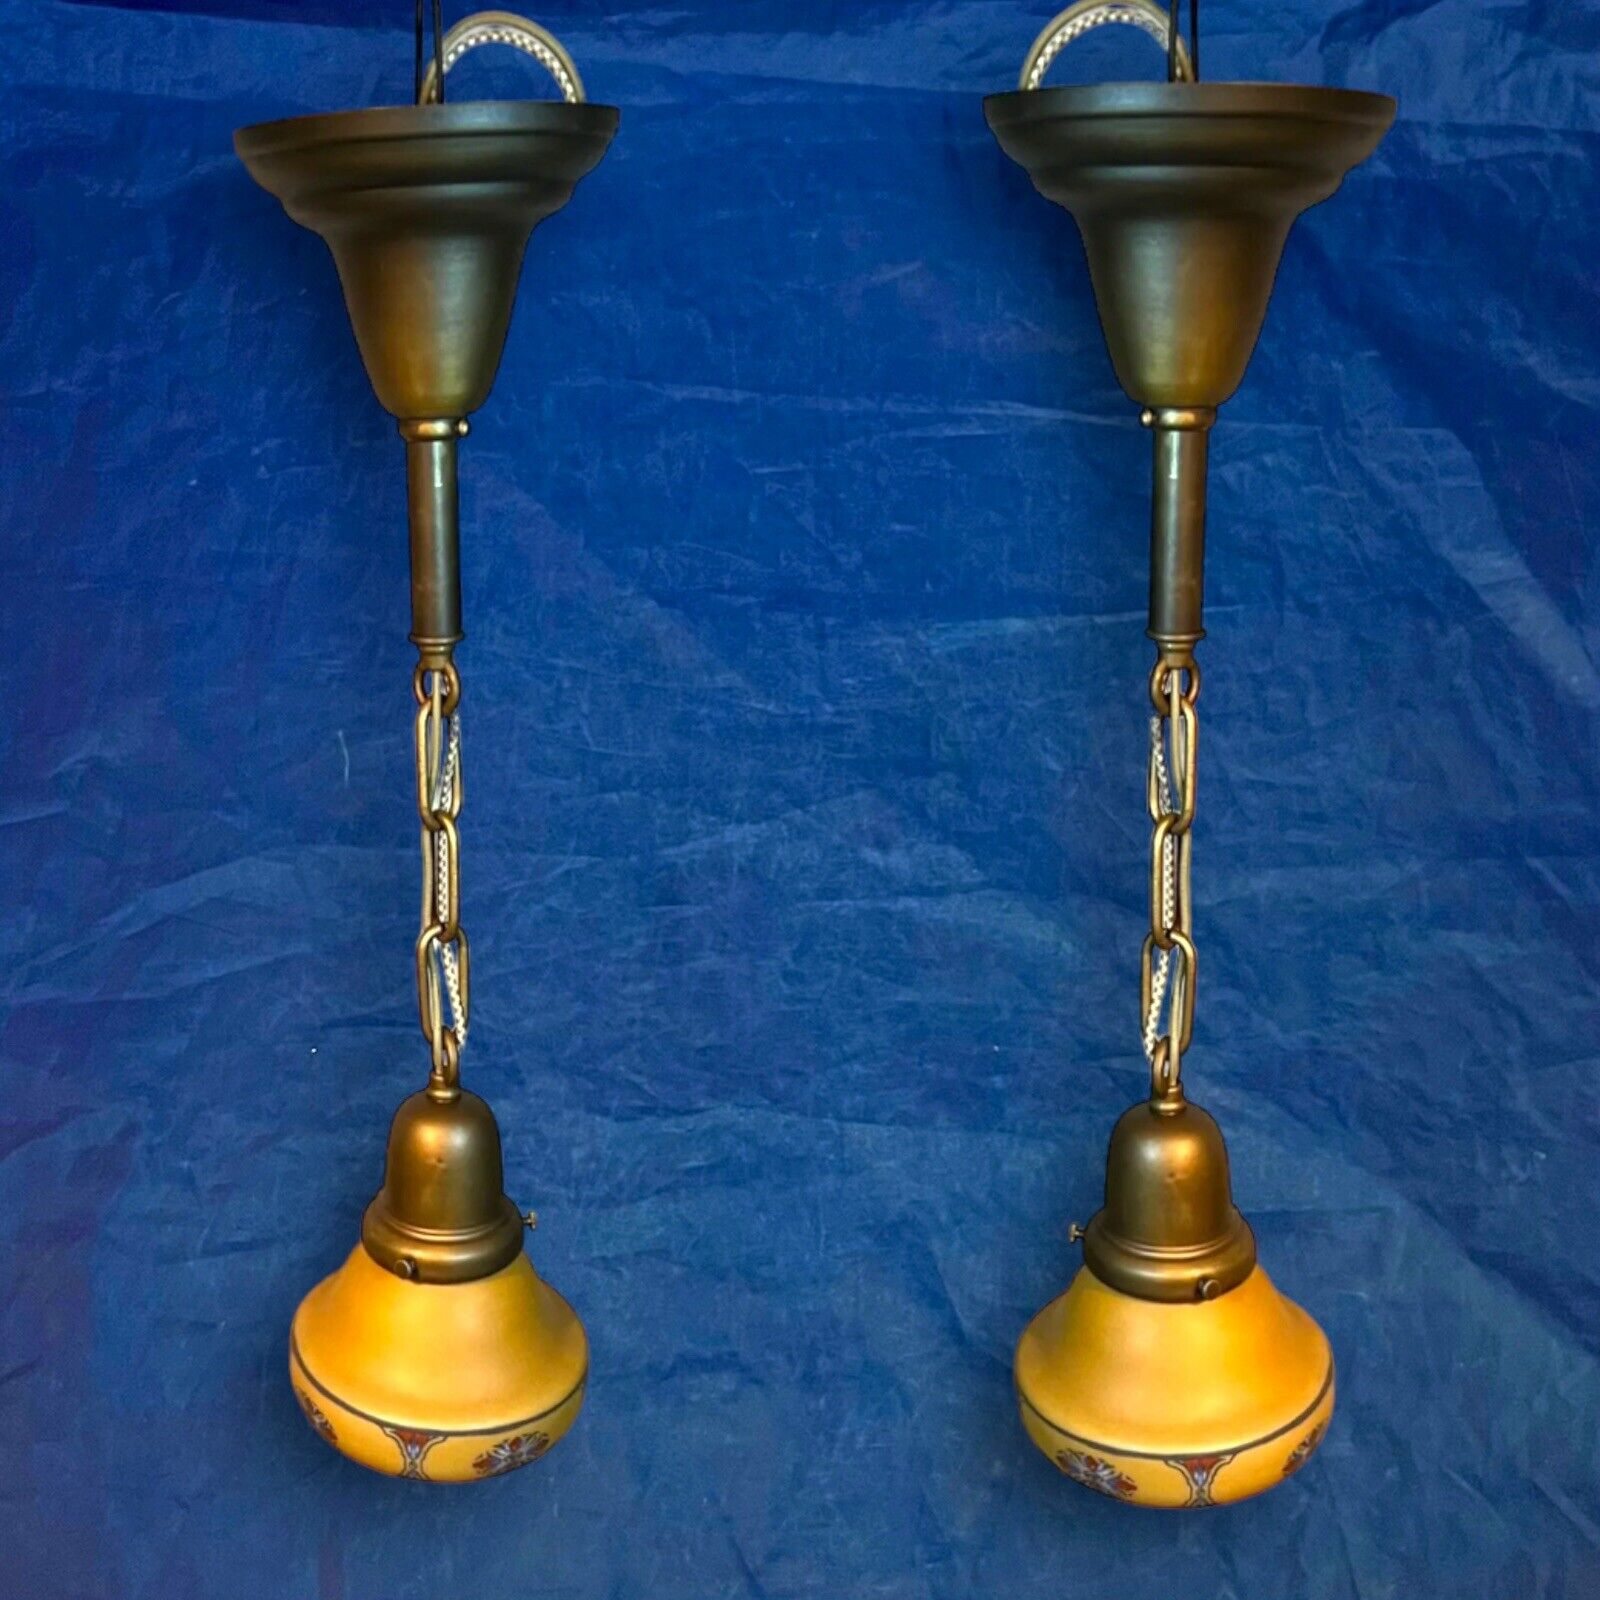 Wired Pair Brass Pendant Light Fixtures antique rare shades 40F